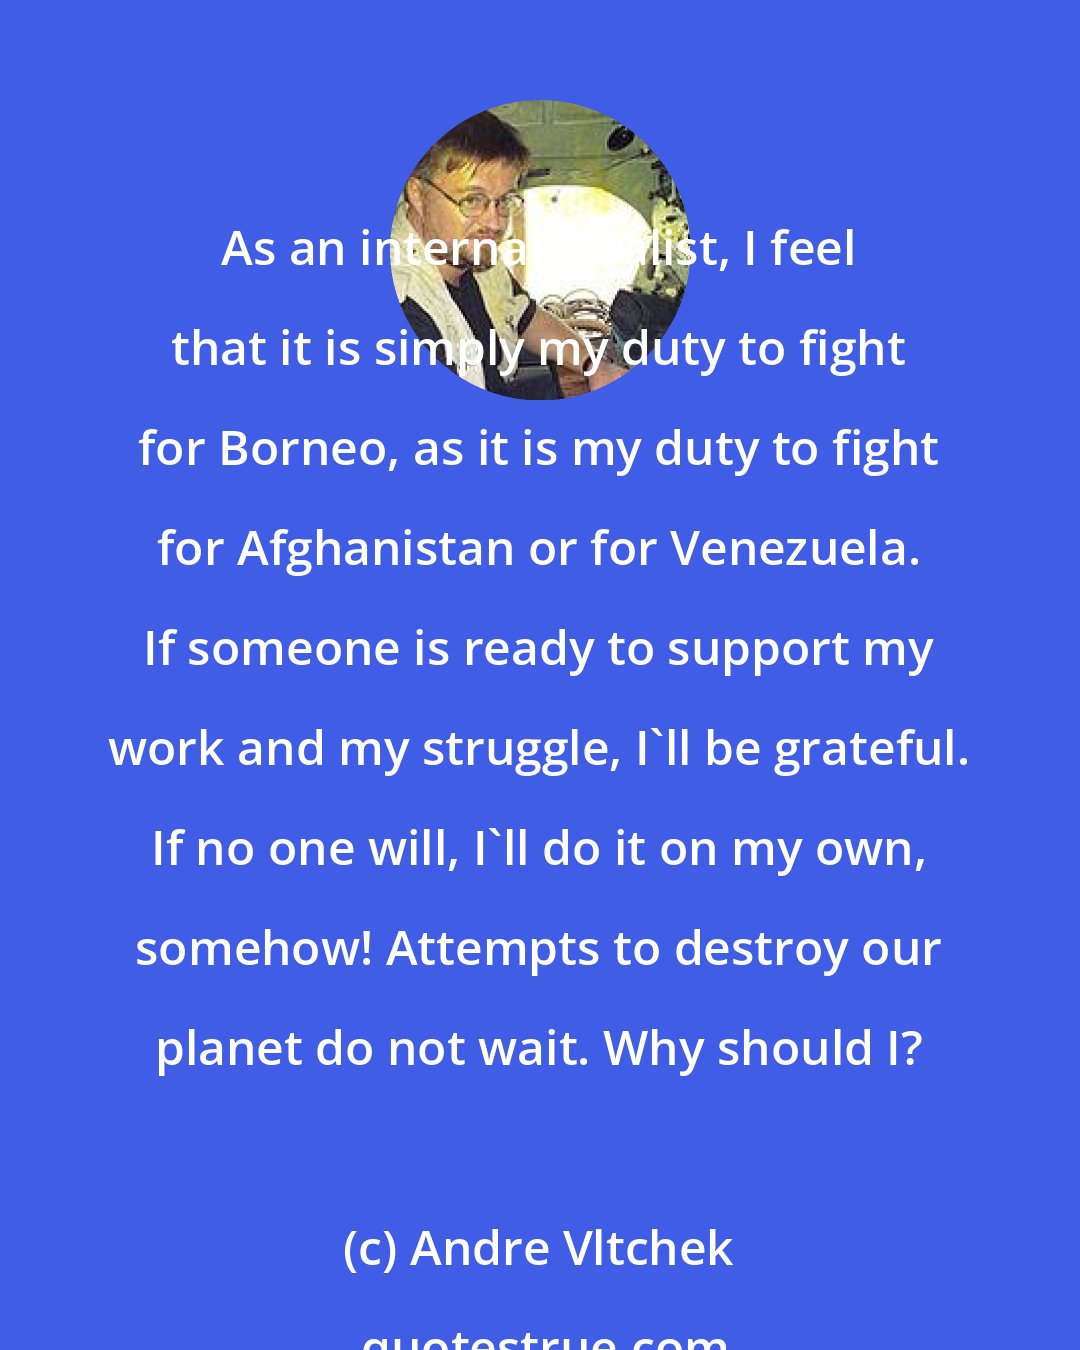 Andre Vltchek: As an internationalist, I feel that it is simply my duty to fight for Borneo, as it is my duty to fight for Afghanistan or for Venezuela. If someone is ready to support my work and my struggle, I'll be grateful. If no one will, I'll do it on my own, somehow! Attempts to destroy our planet do not wait. Why should I?